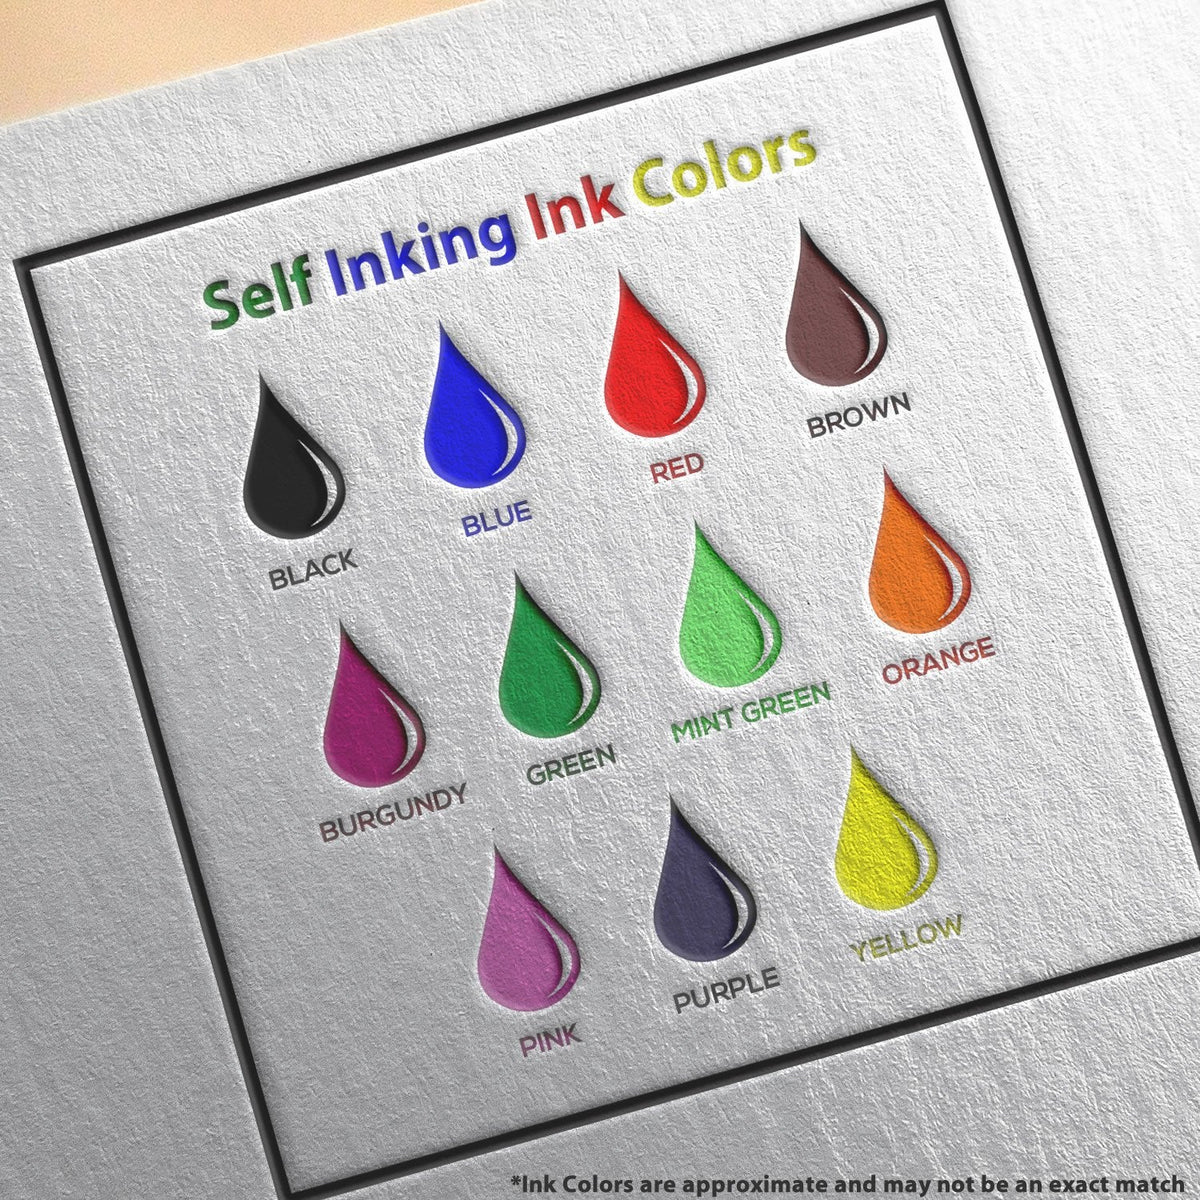 Self-Inking Round Sign Here with Arrow Stamp Ink Color Options